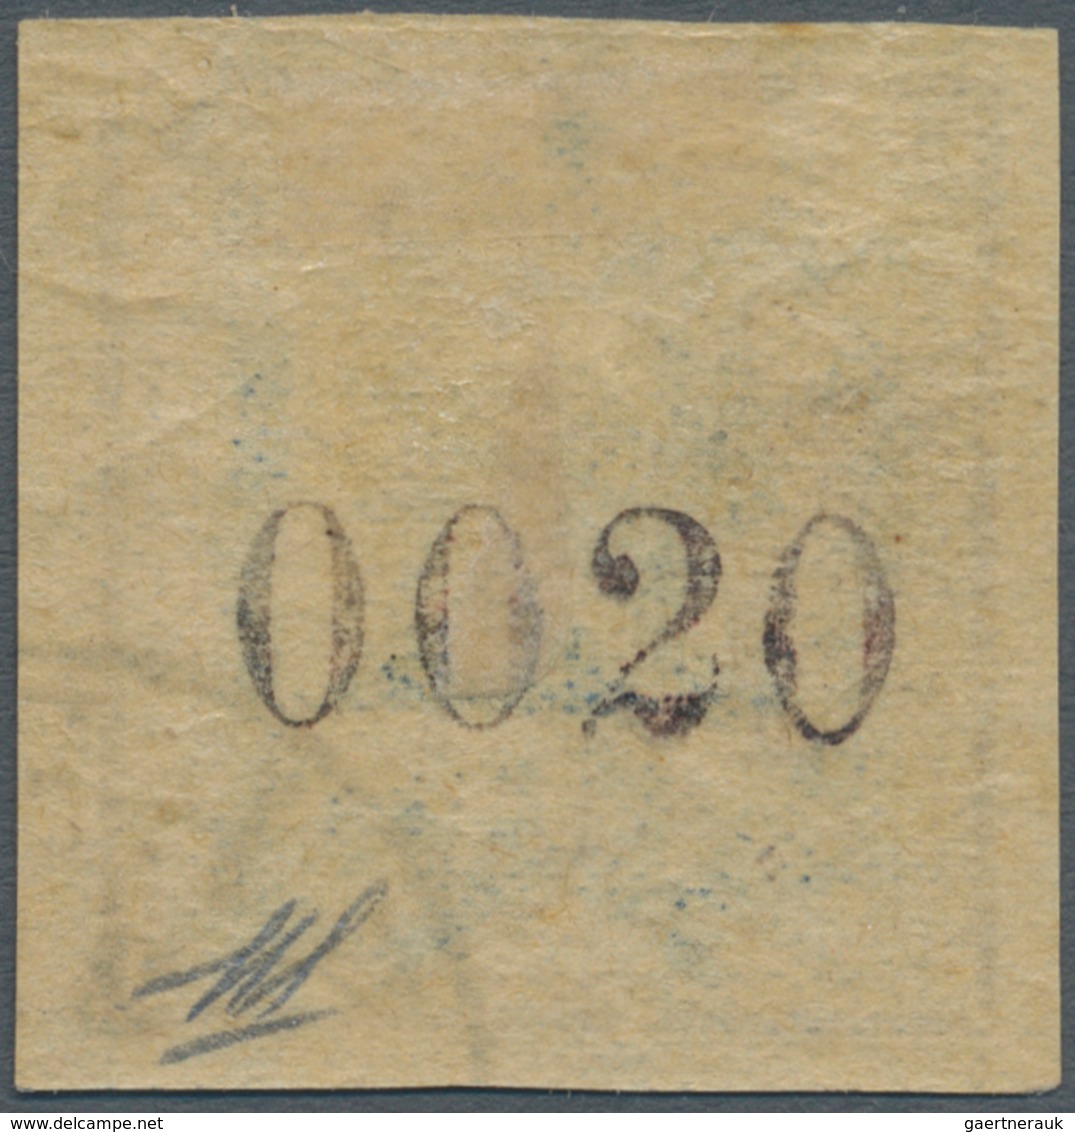 Iran: 1902, Unissued 50 T. Magenta And Grey Rosette Background, Position 3 With "0020" Control Numbe - Iran